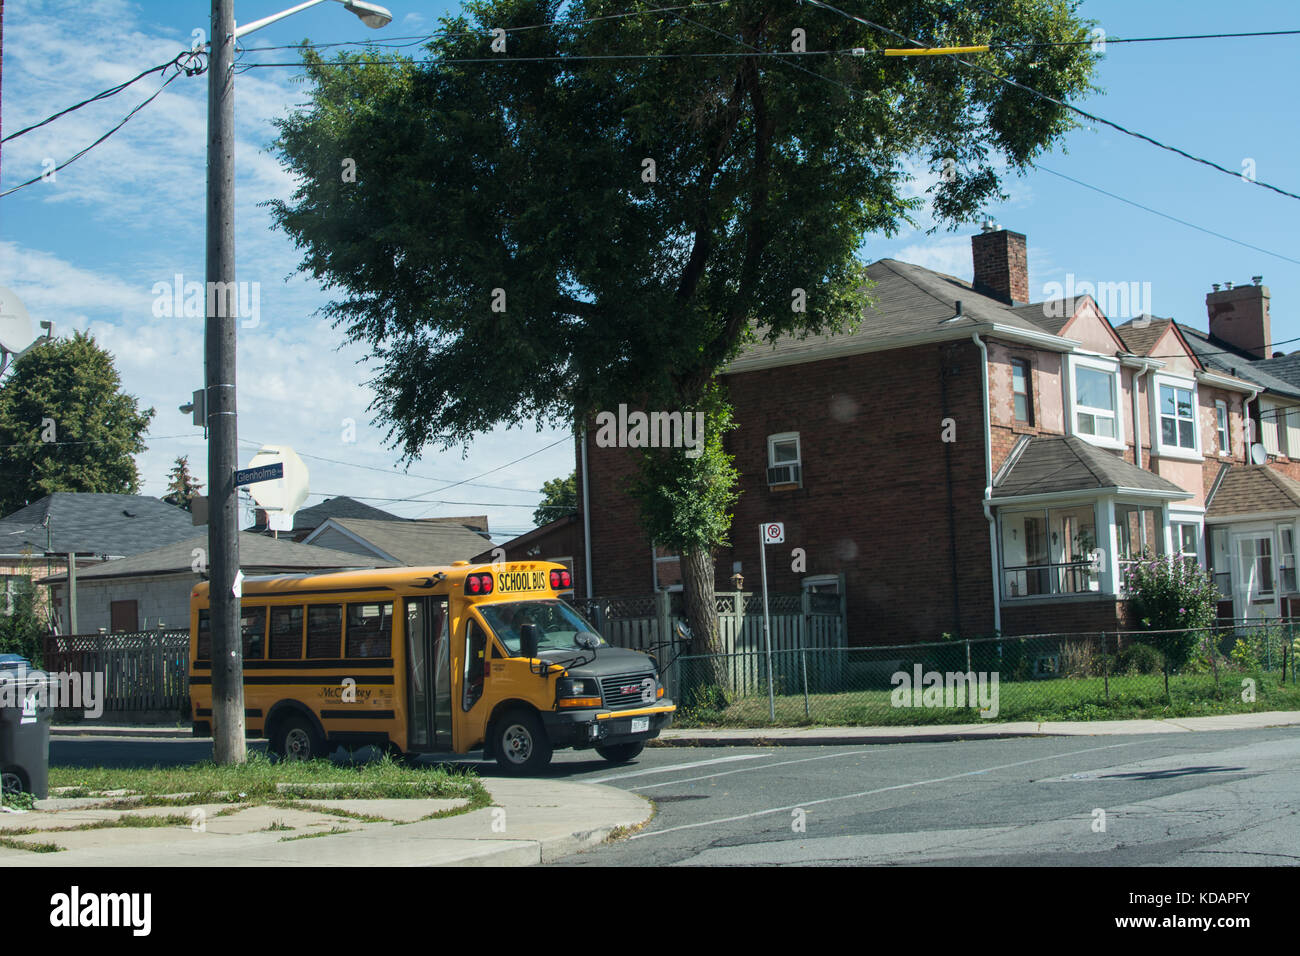 Yellow School bus Toronto Canada children's bus child leaving going to school  old type transport local locals estate collecting collect collected Stock Photo